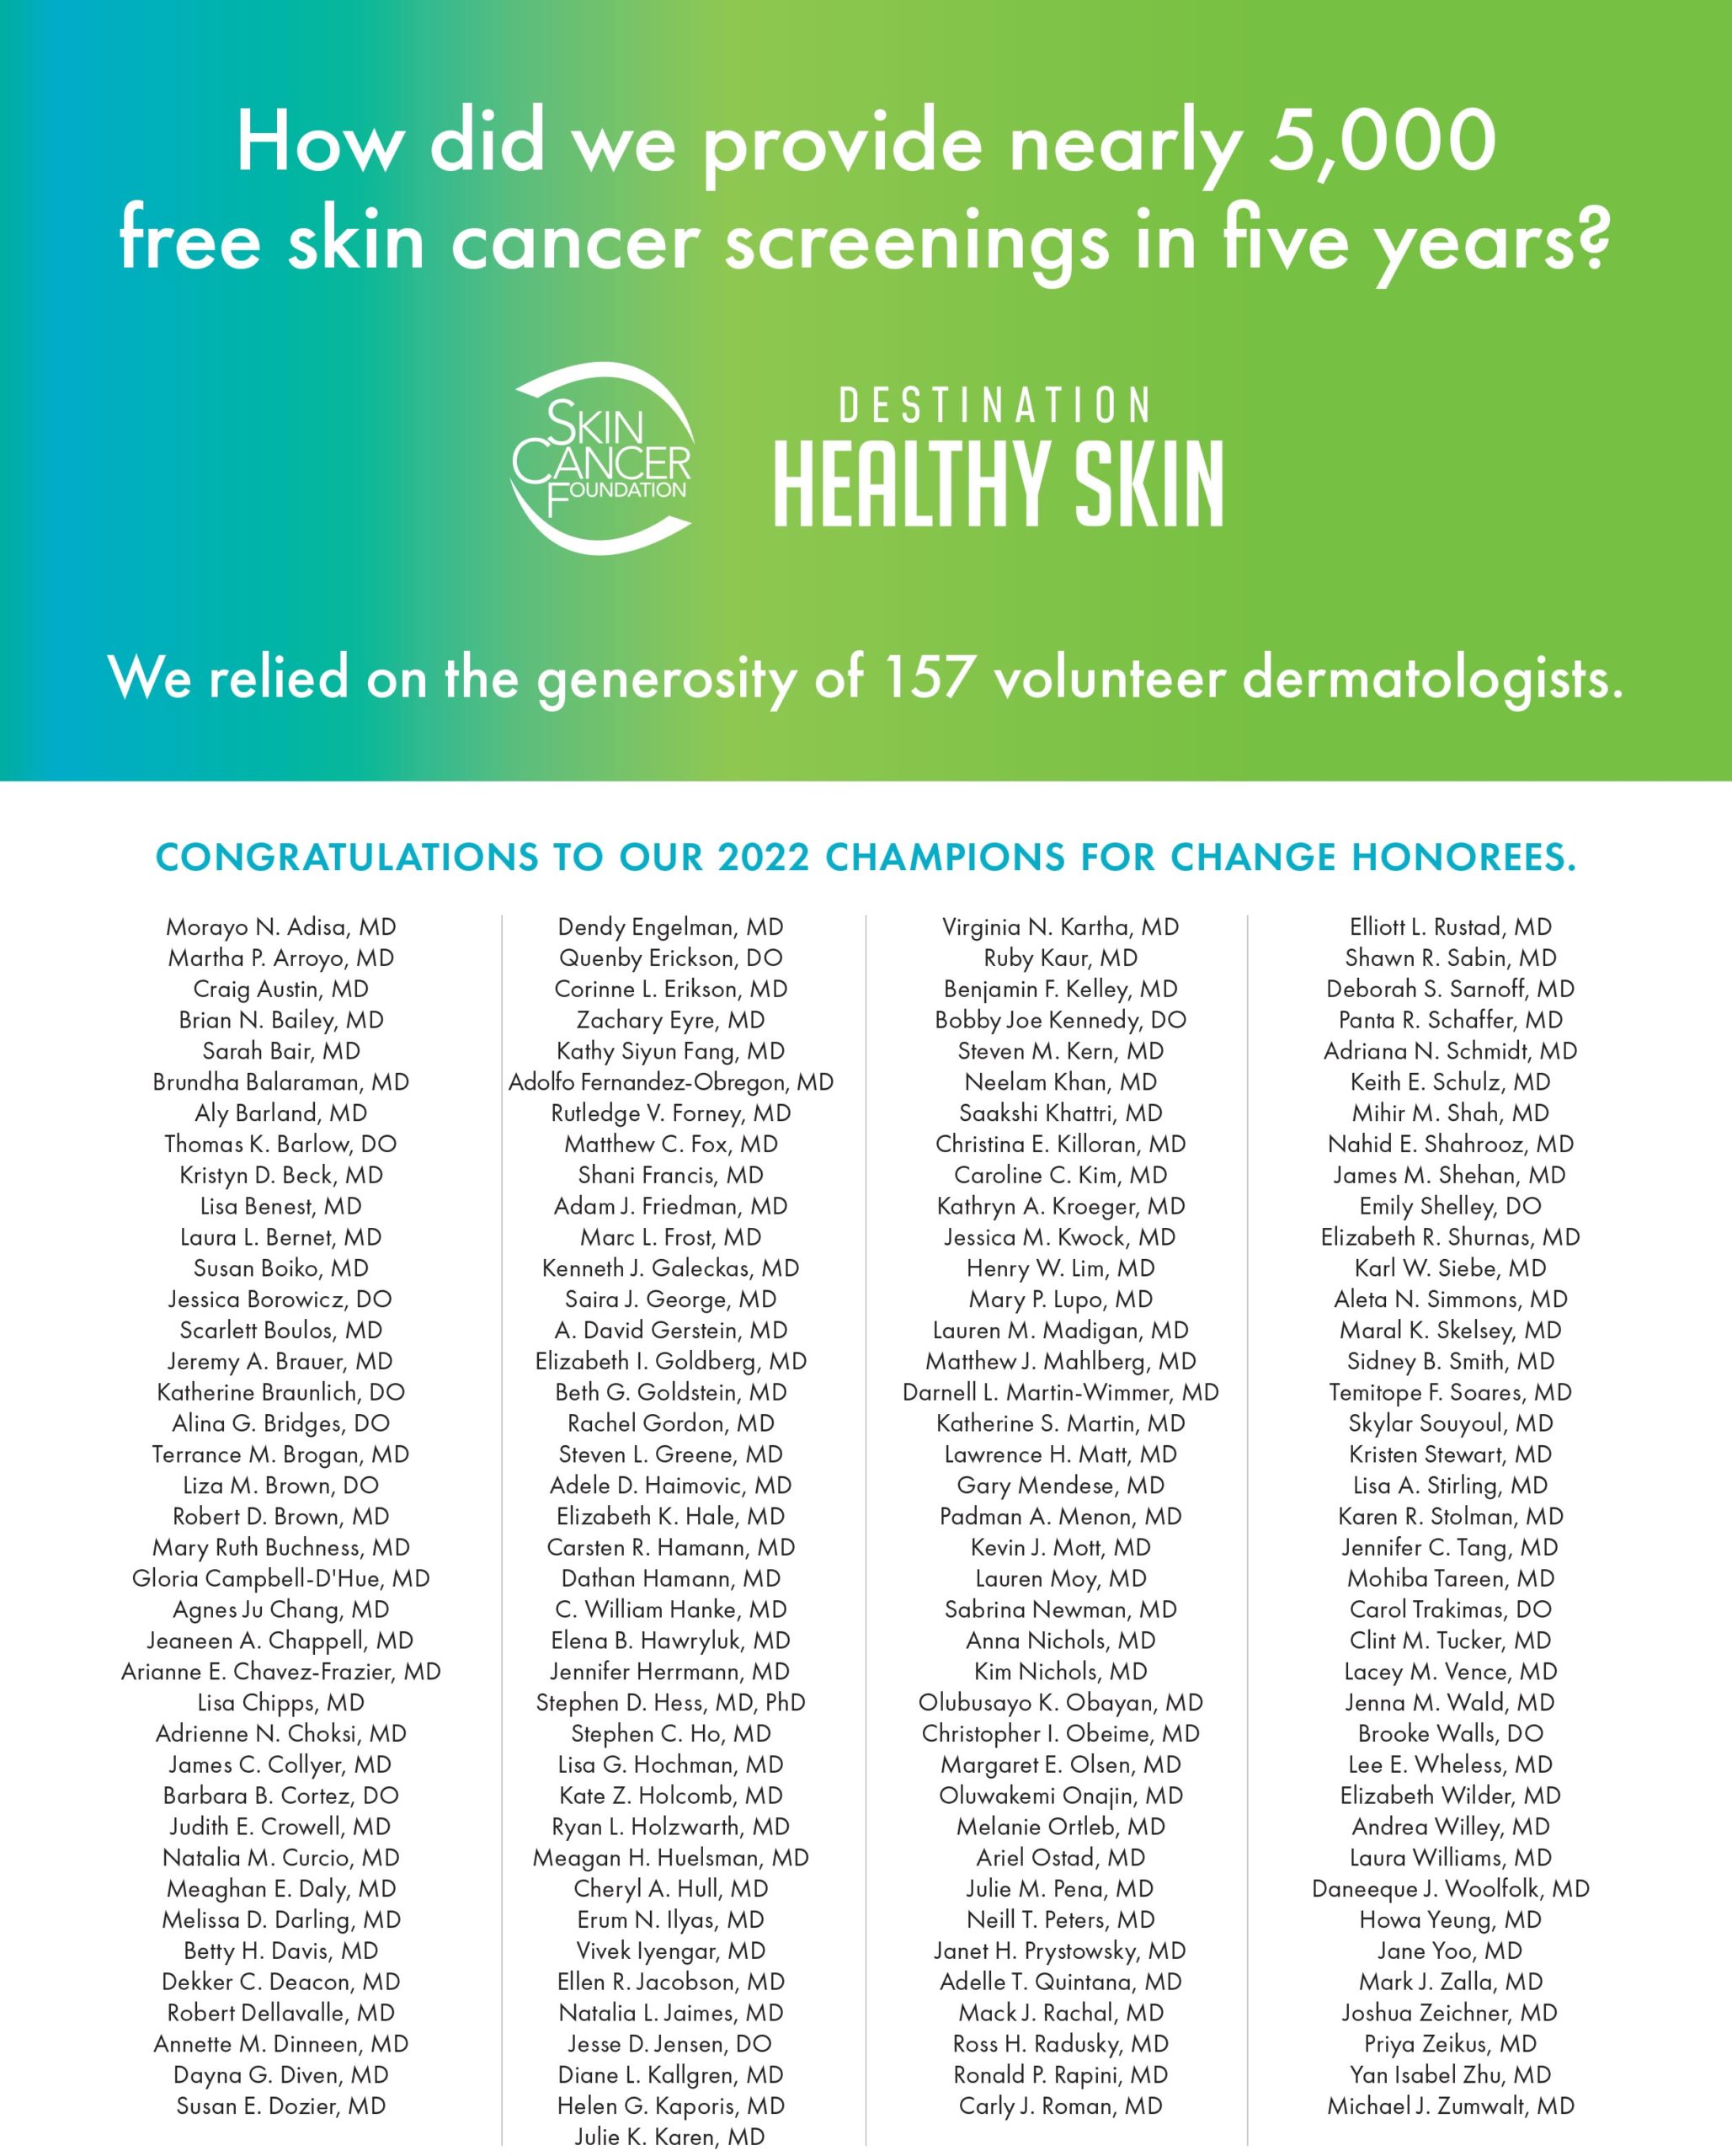 How did we provide nearly 5,000 free skin cancer screenings in five years? We relied on the generosity of 157 volunteer dermatologists listed here.